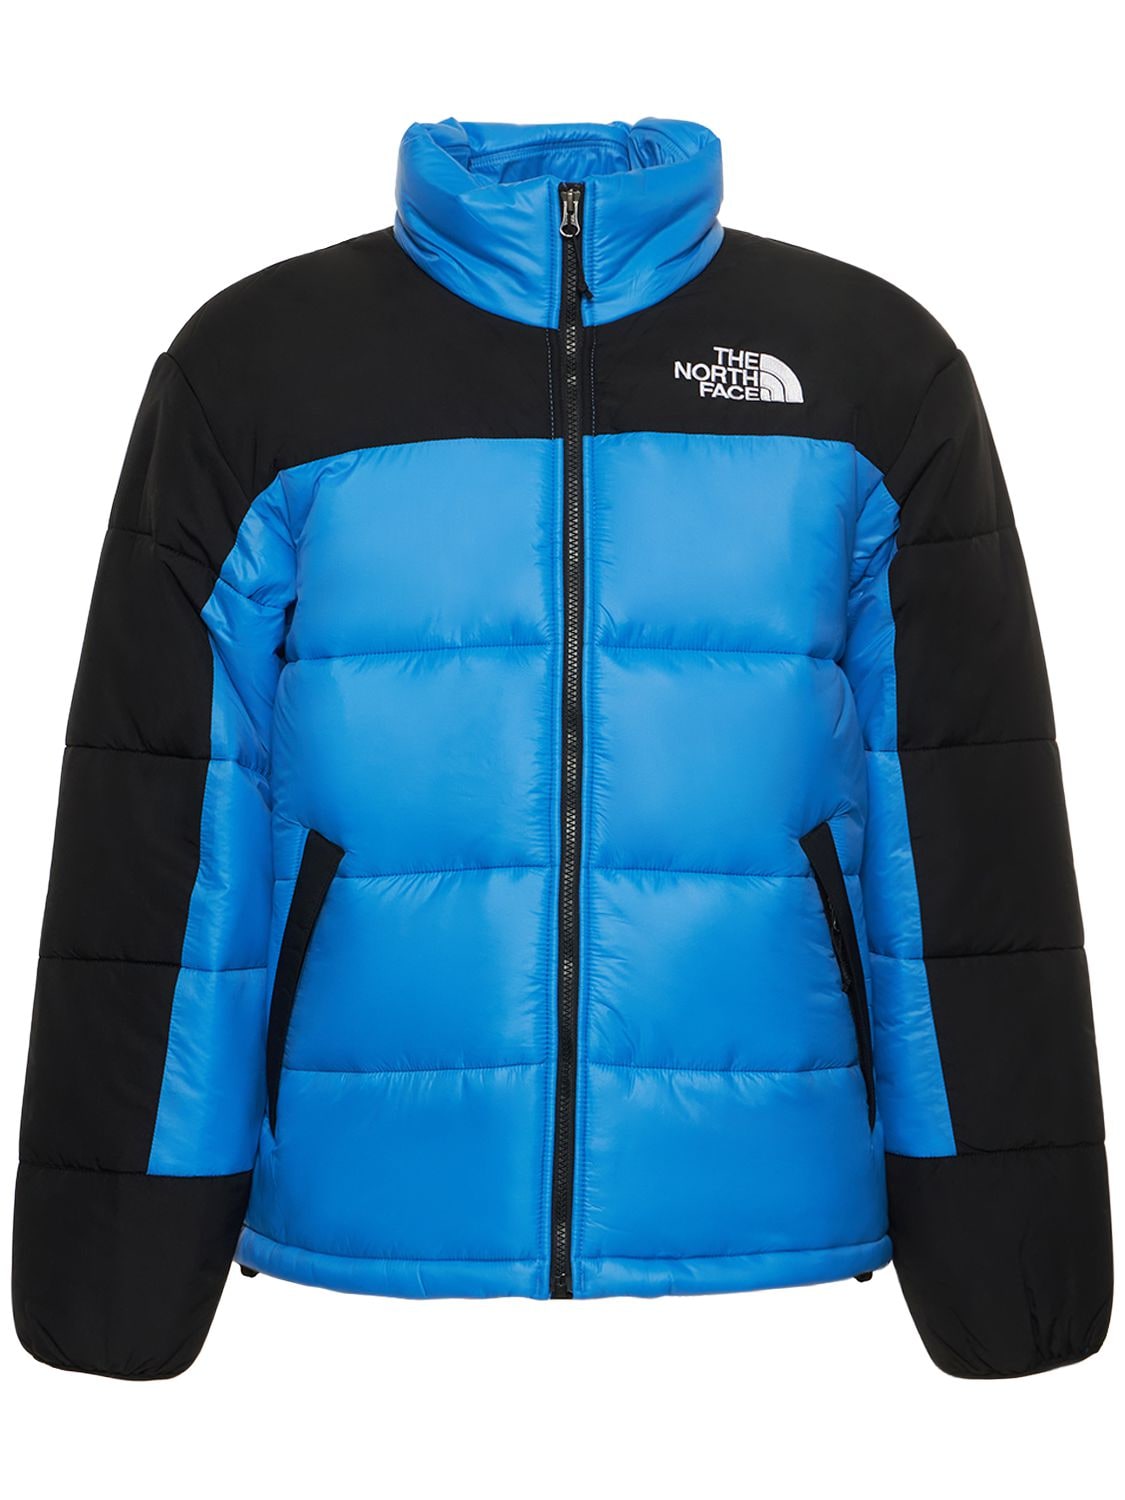 THE NORTH FACE HIMALAYAN INSULATED JACKET